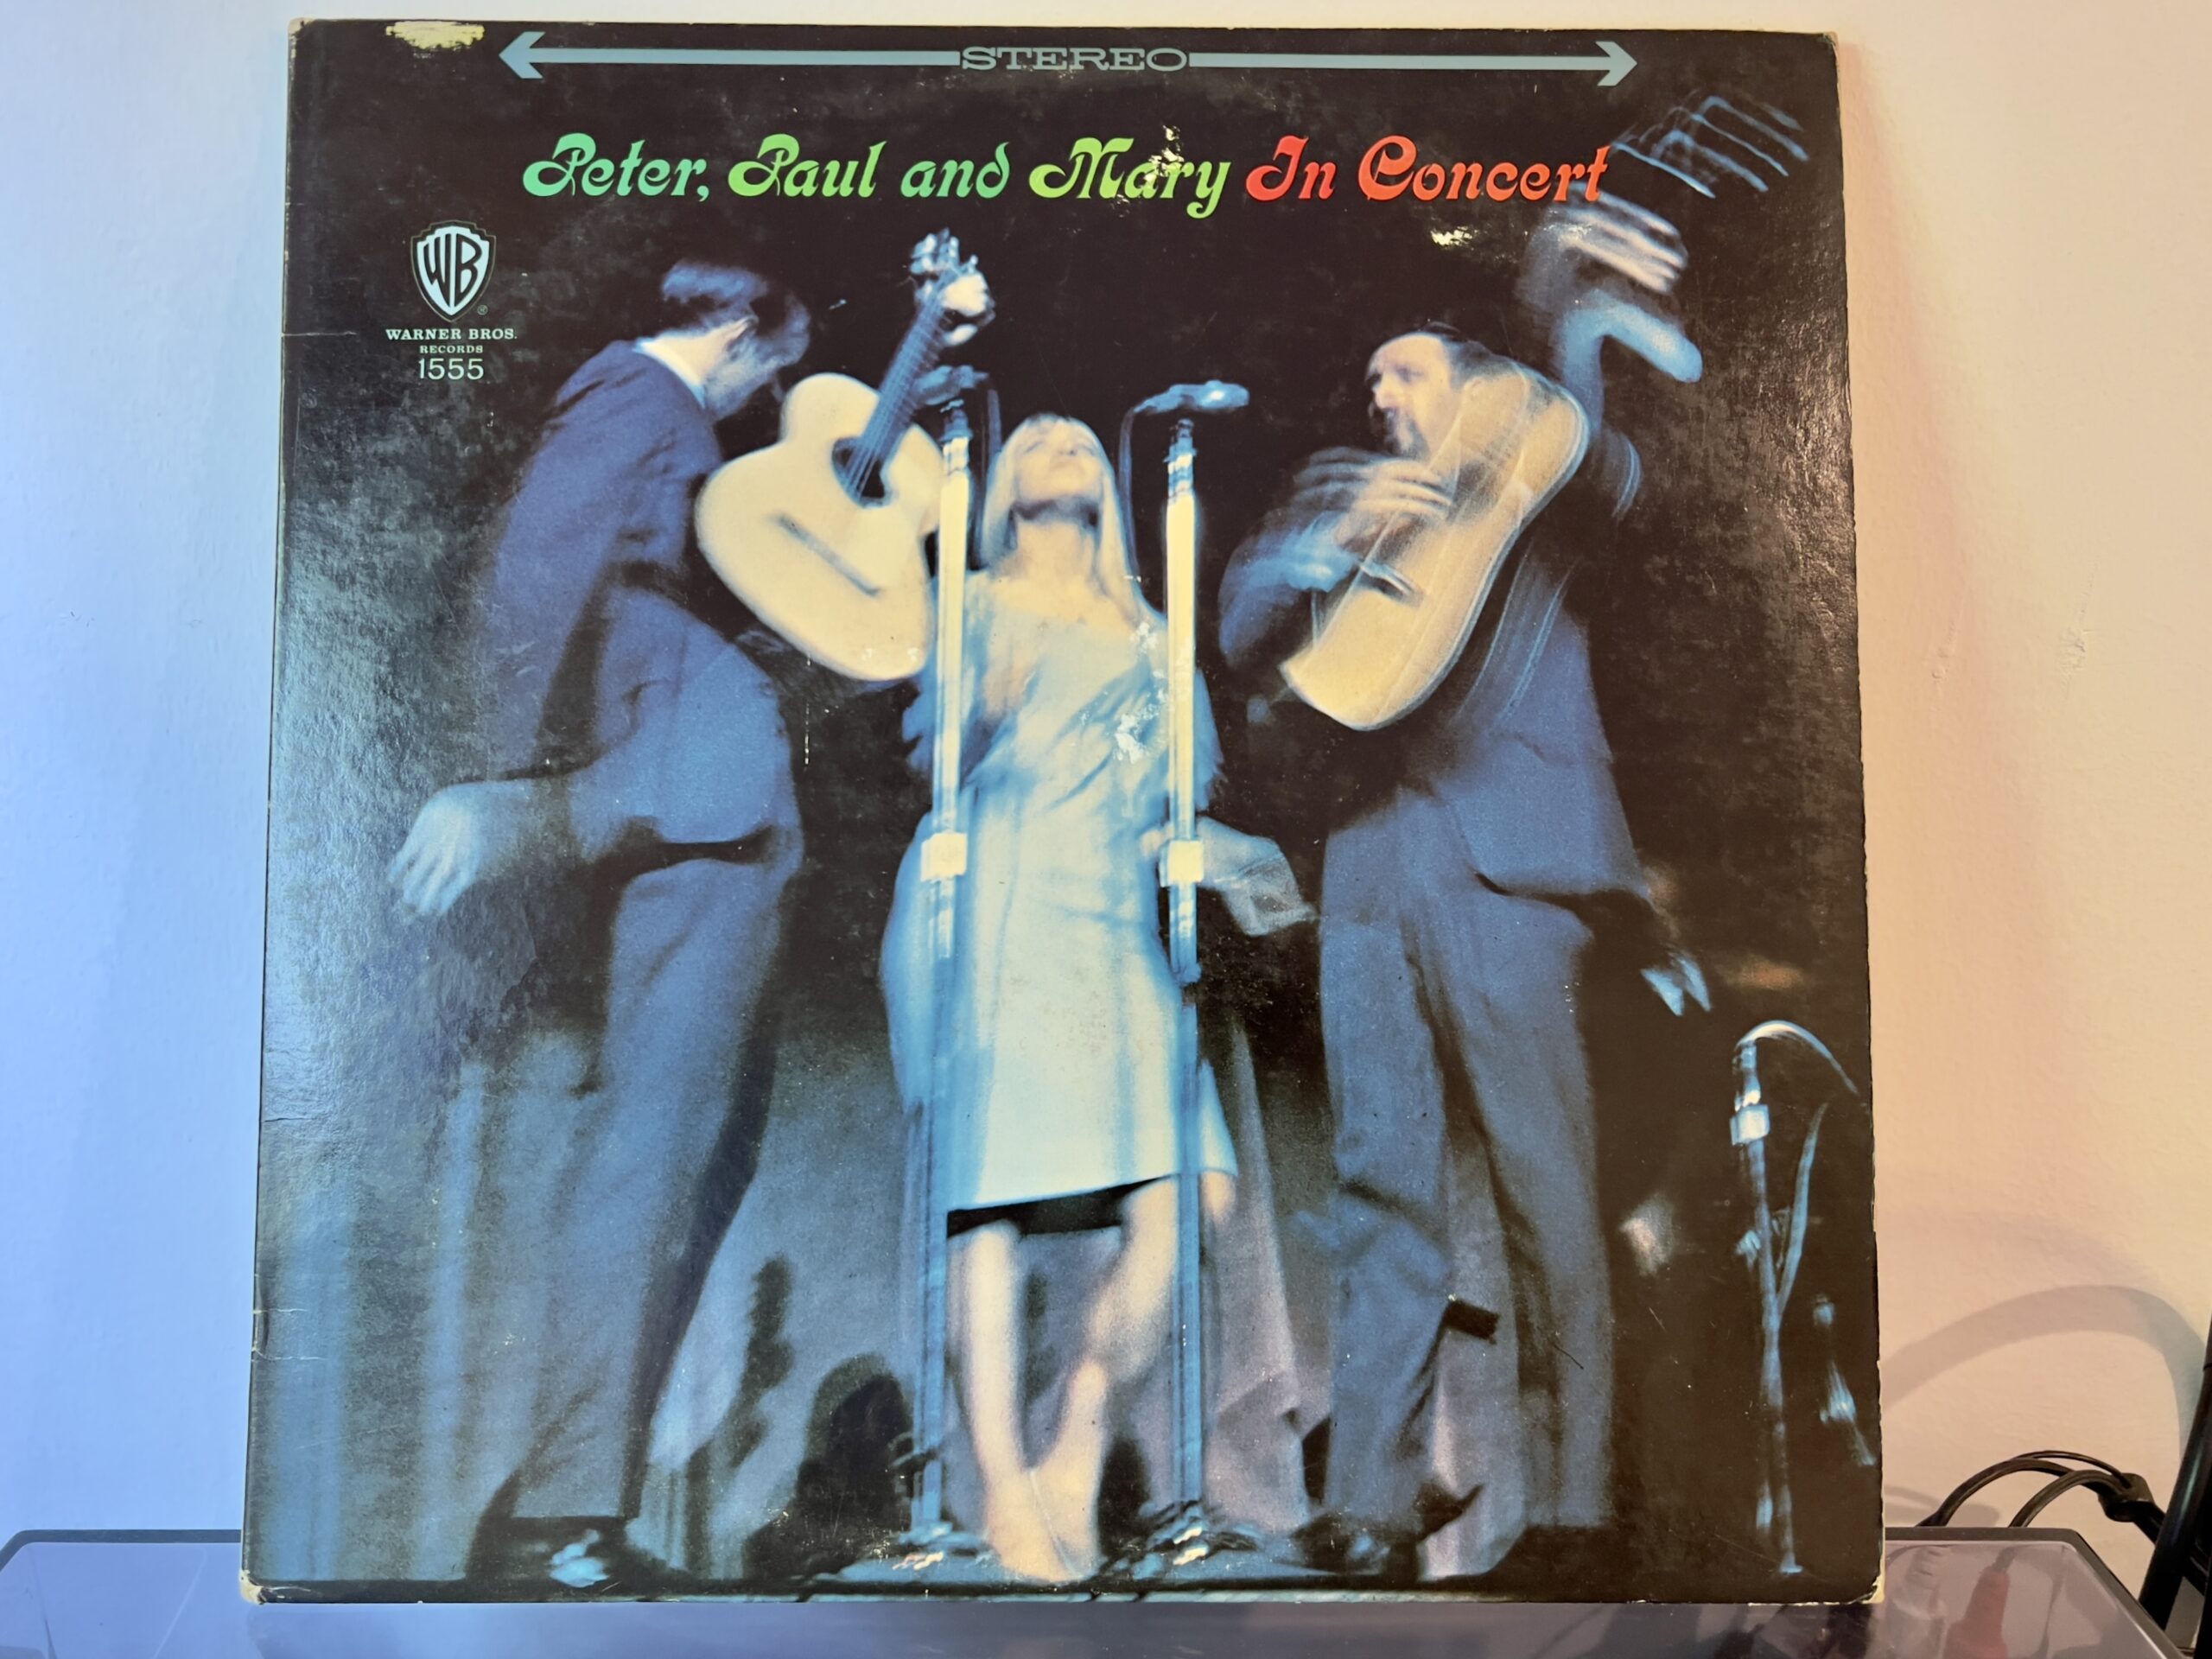 Peter, Paul and Mary In Concert (Vinyl record album review)